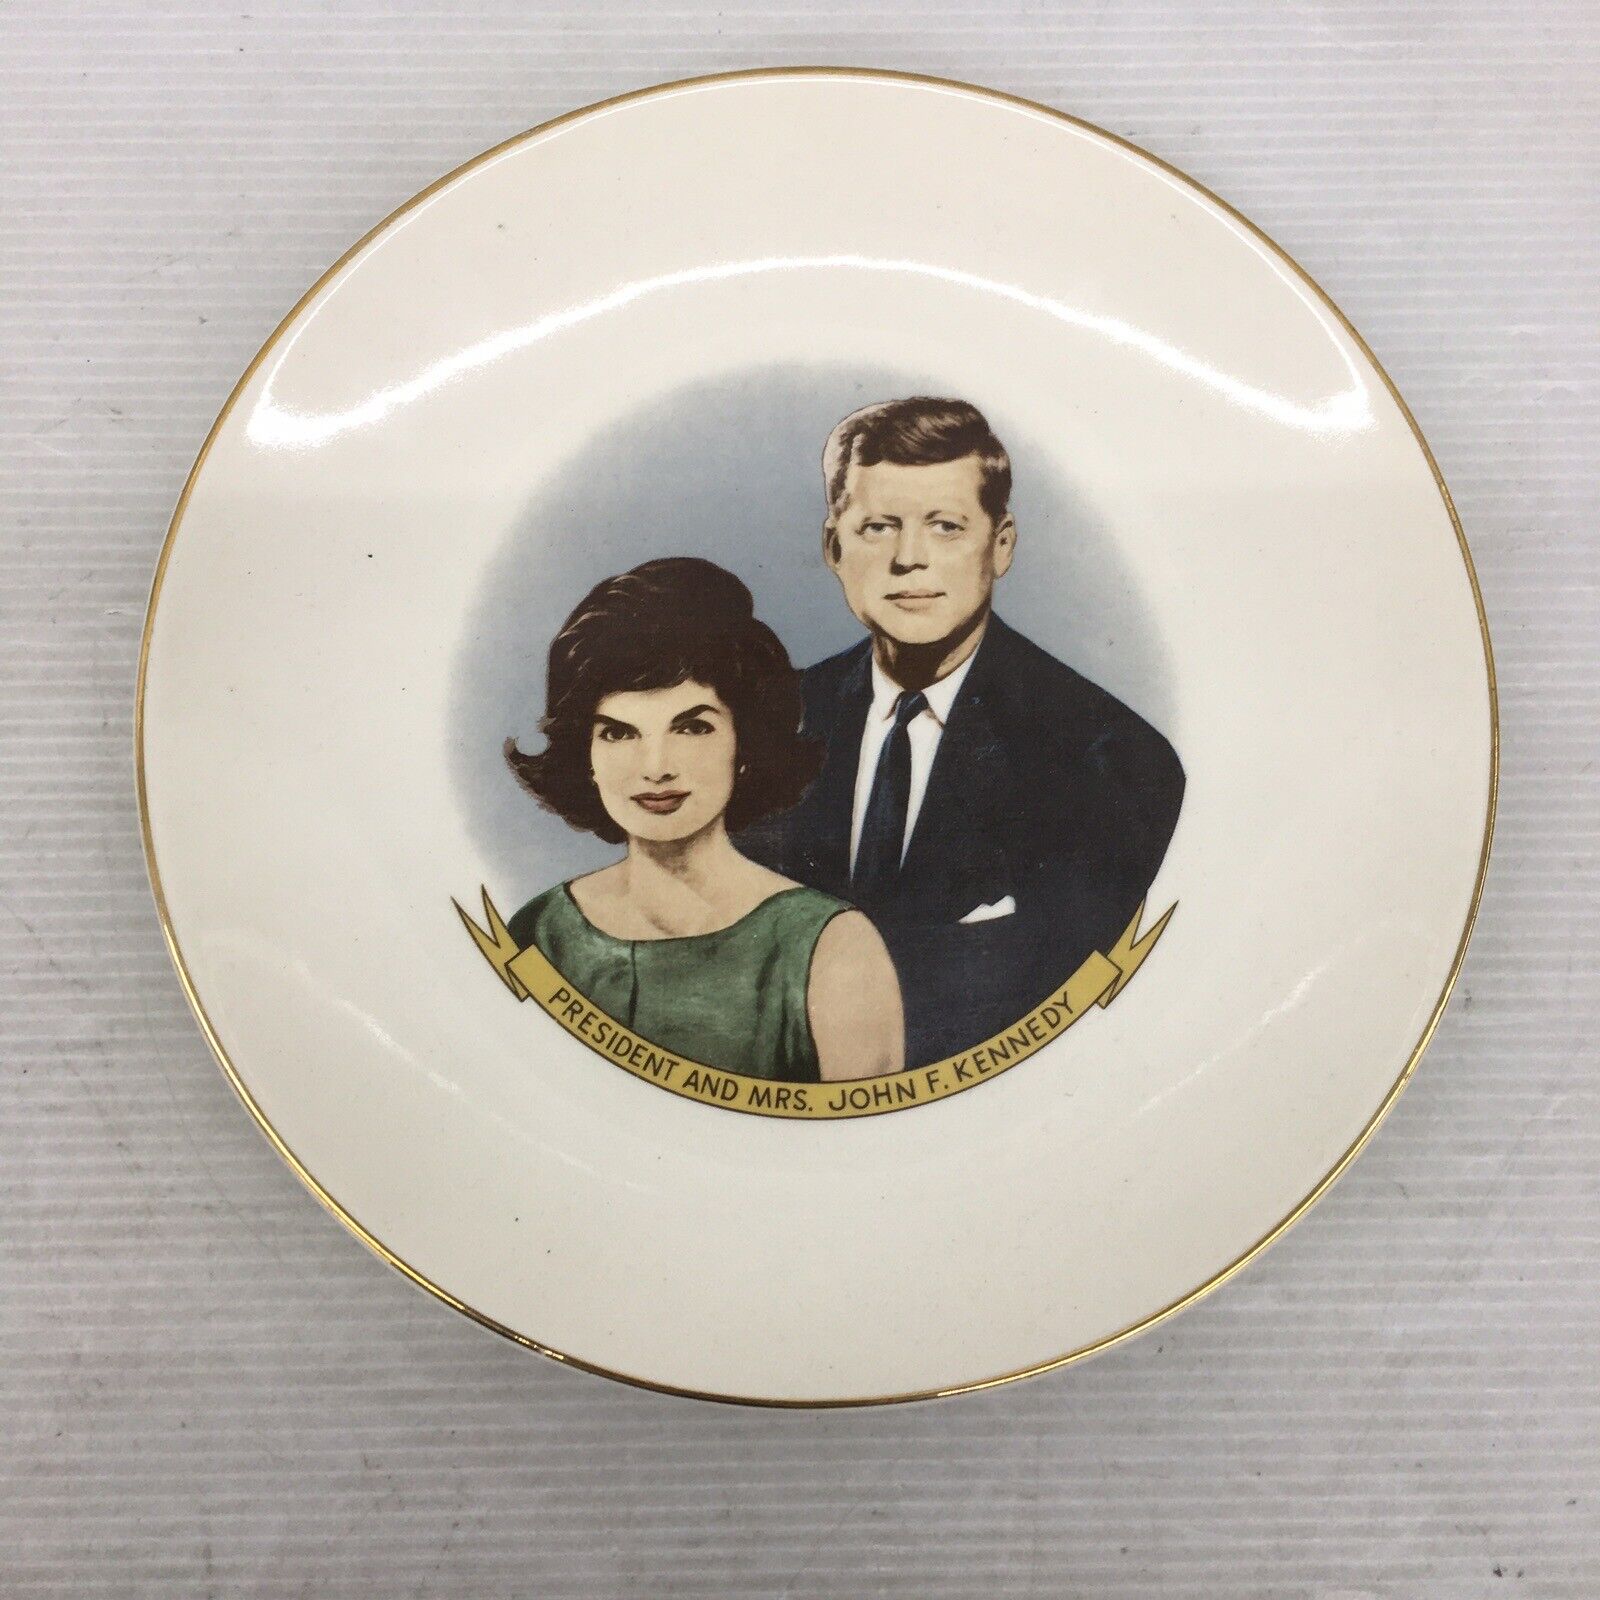 VTG USA President & Mrs John F Kennedy Jackie First Lady Collectible Plate